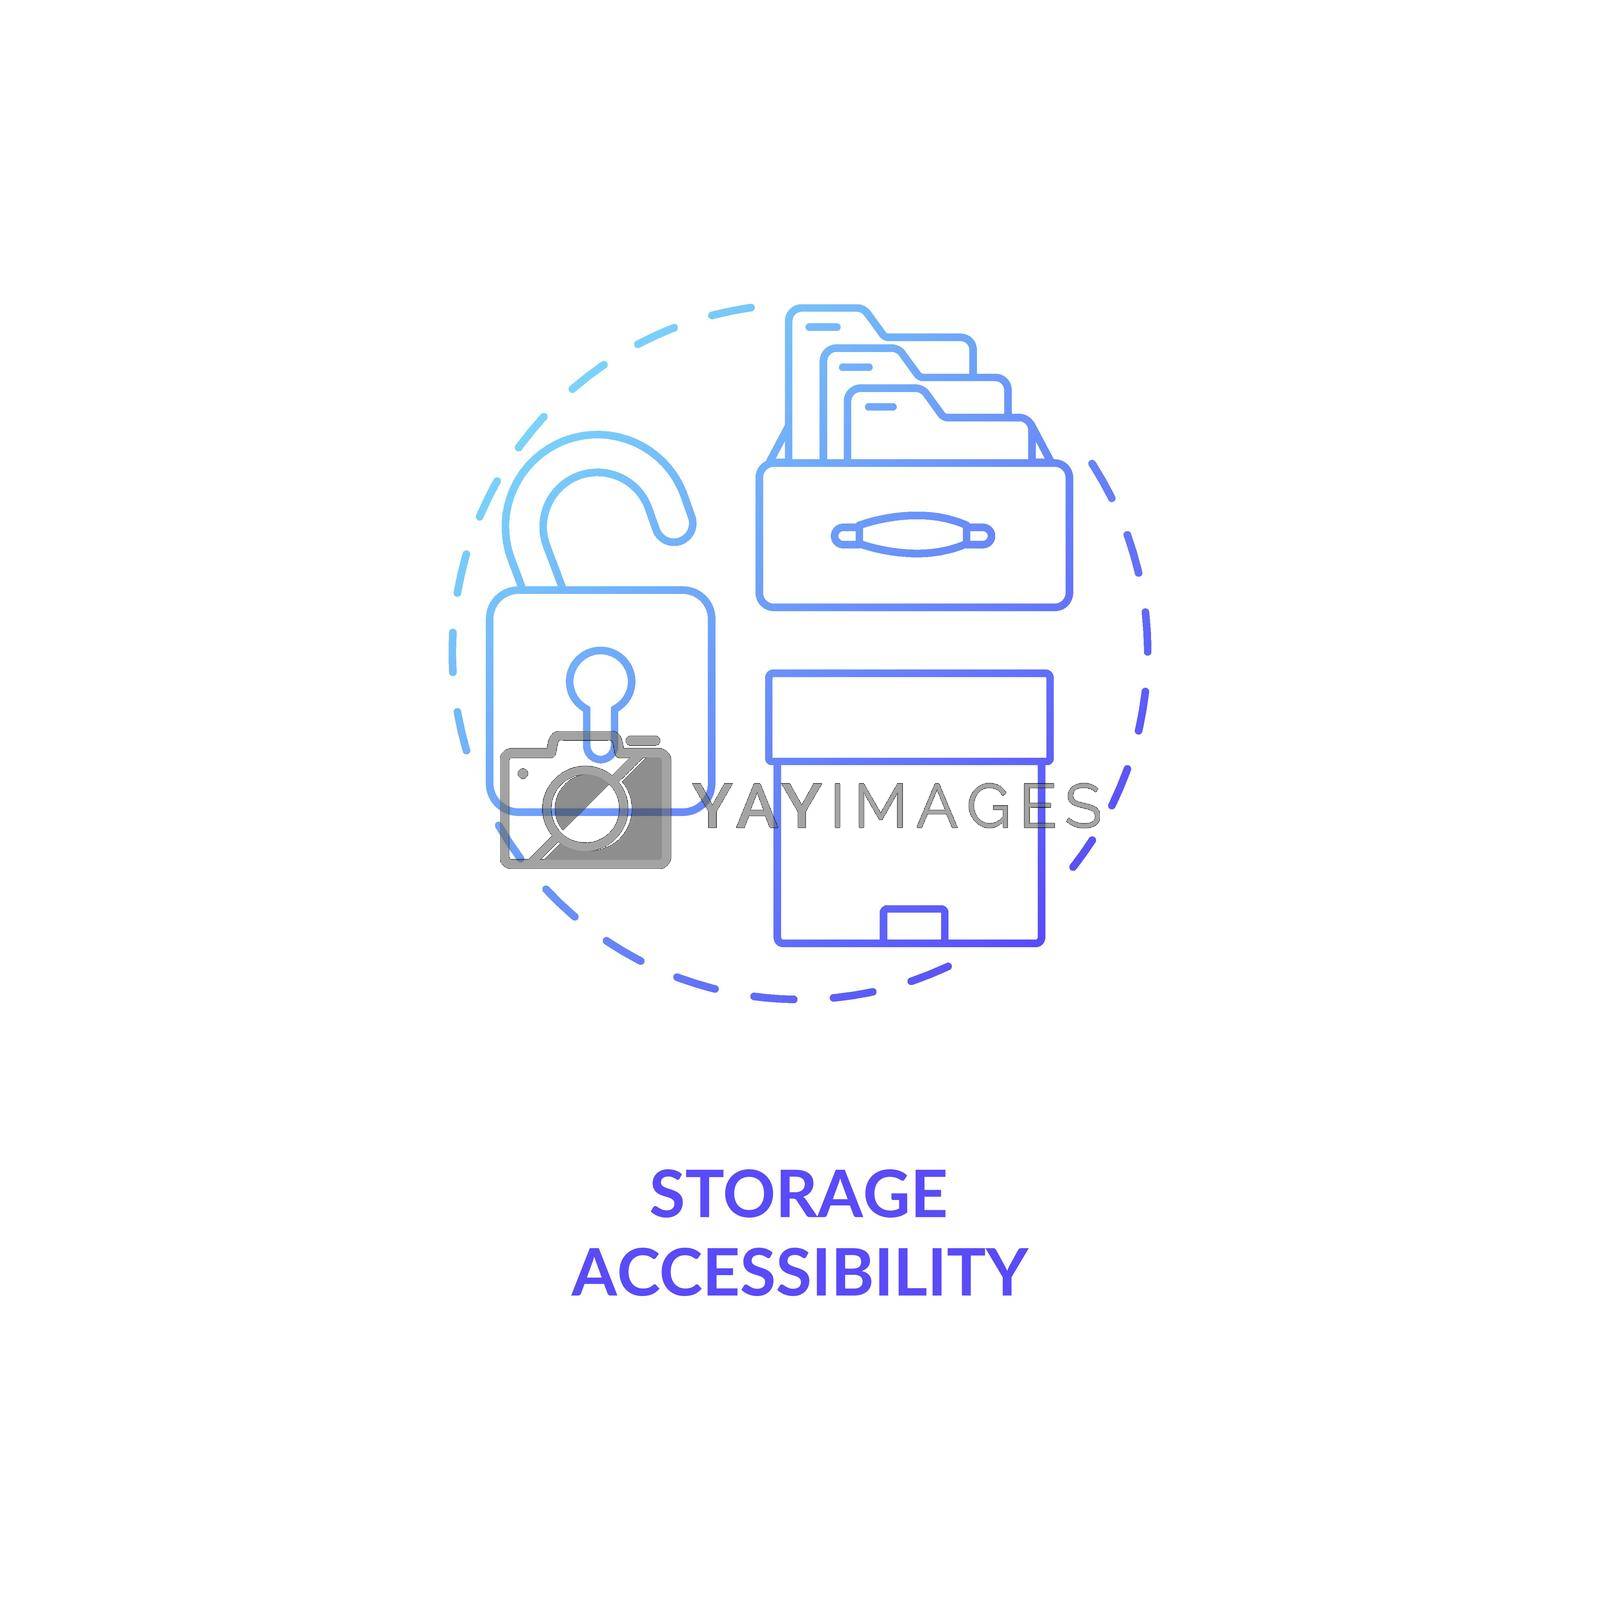 Royalty free image of Storage accessibility concept icon by bsd